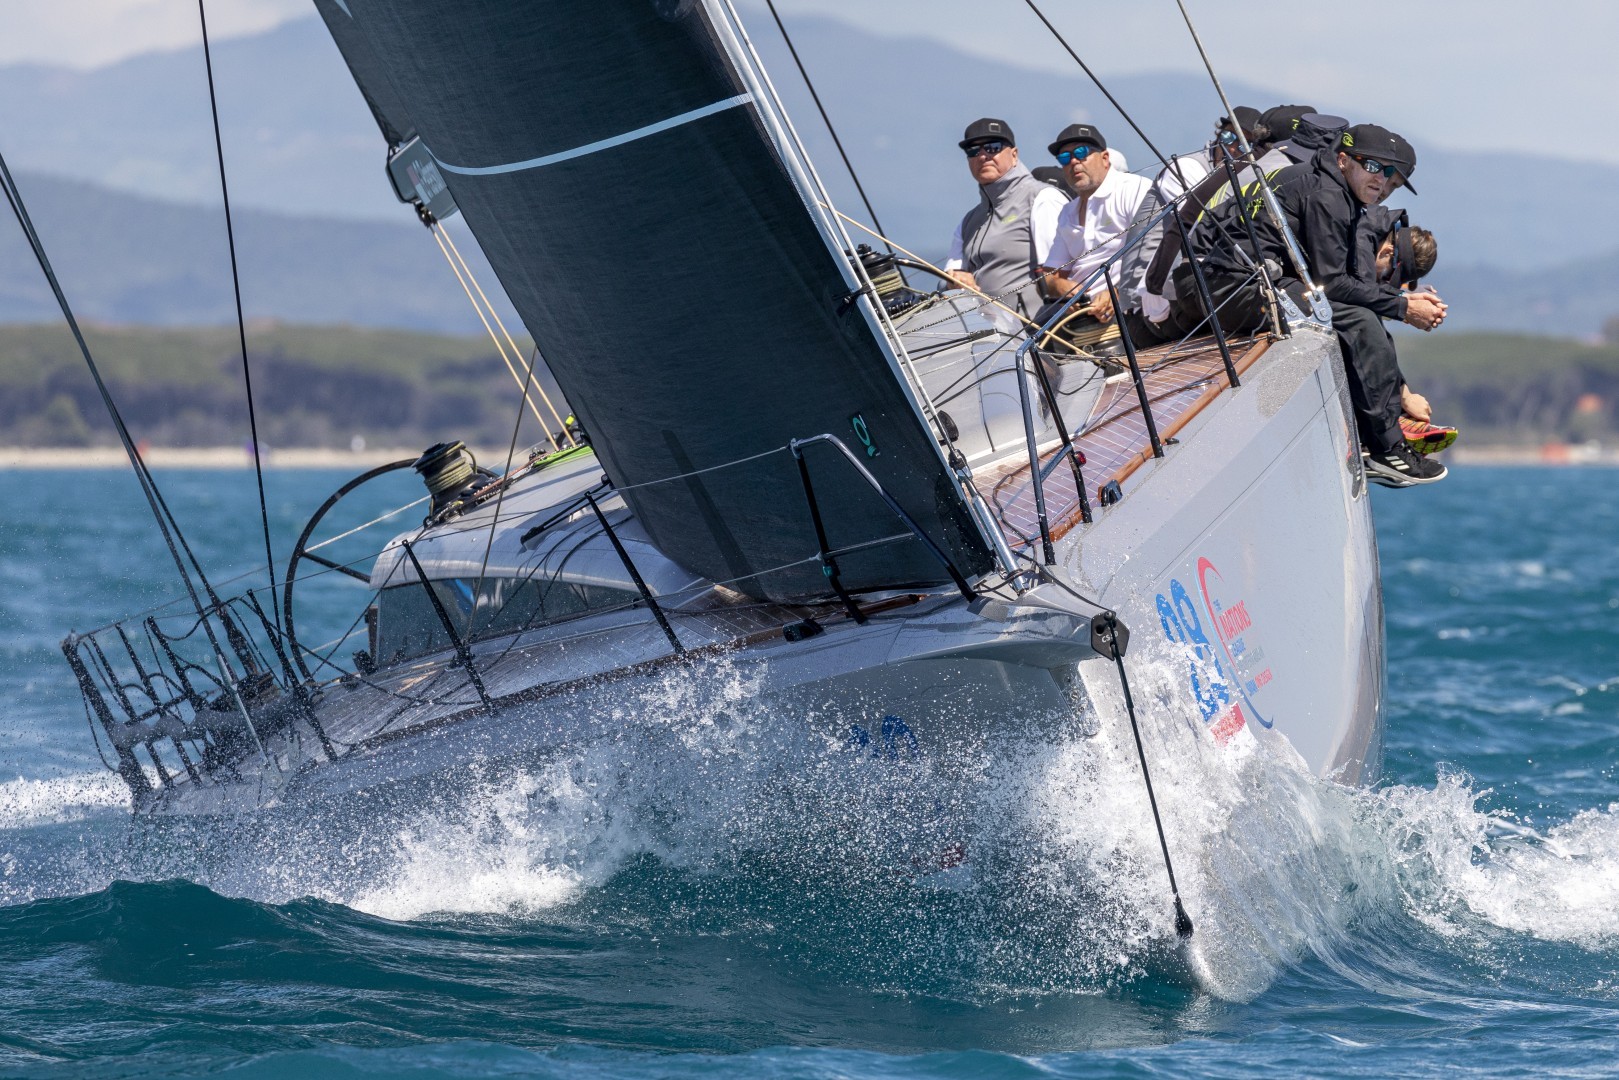 Scarlino delivers ideal conditions as ClubSwan Racing season gets underway